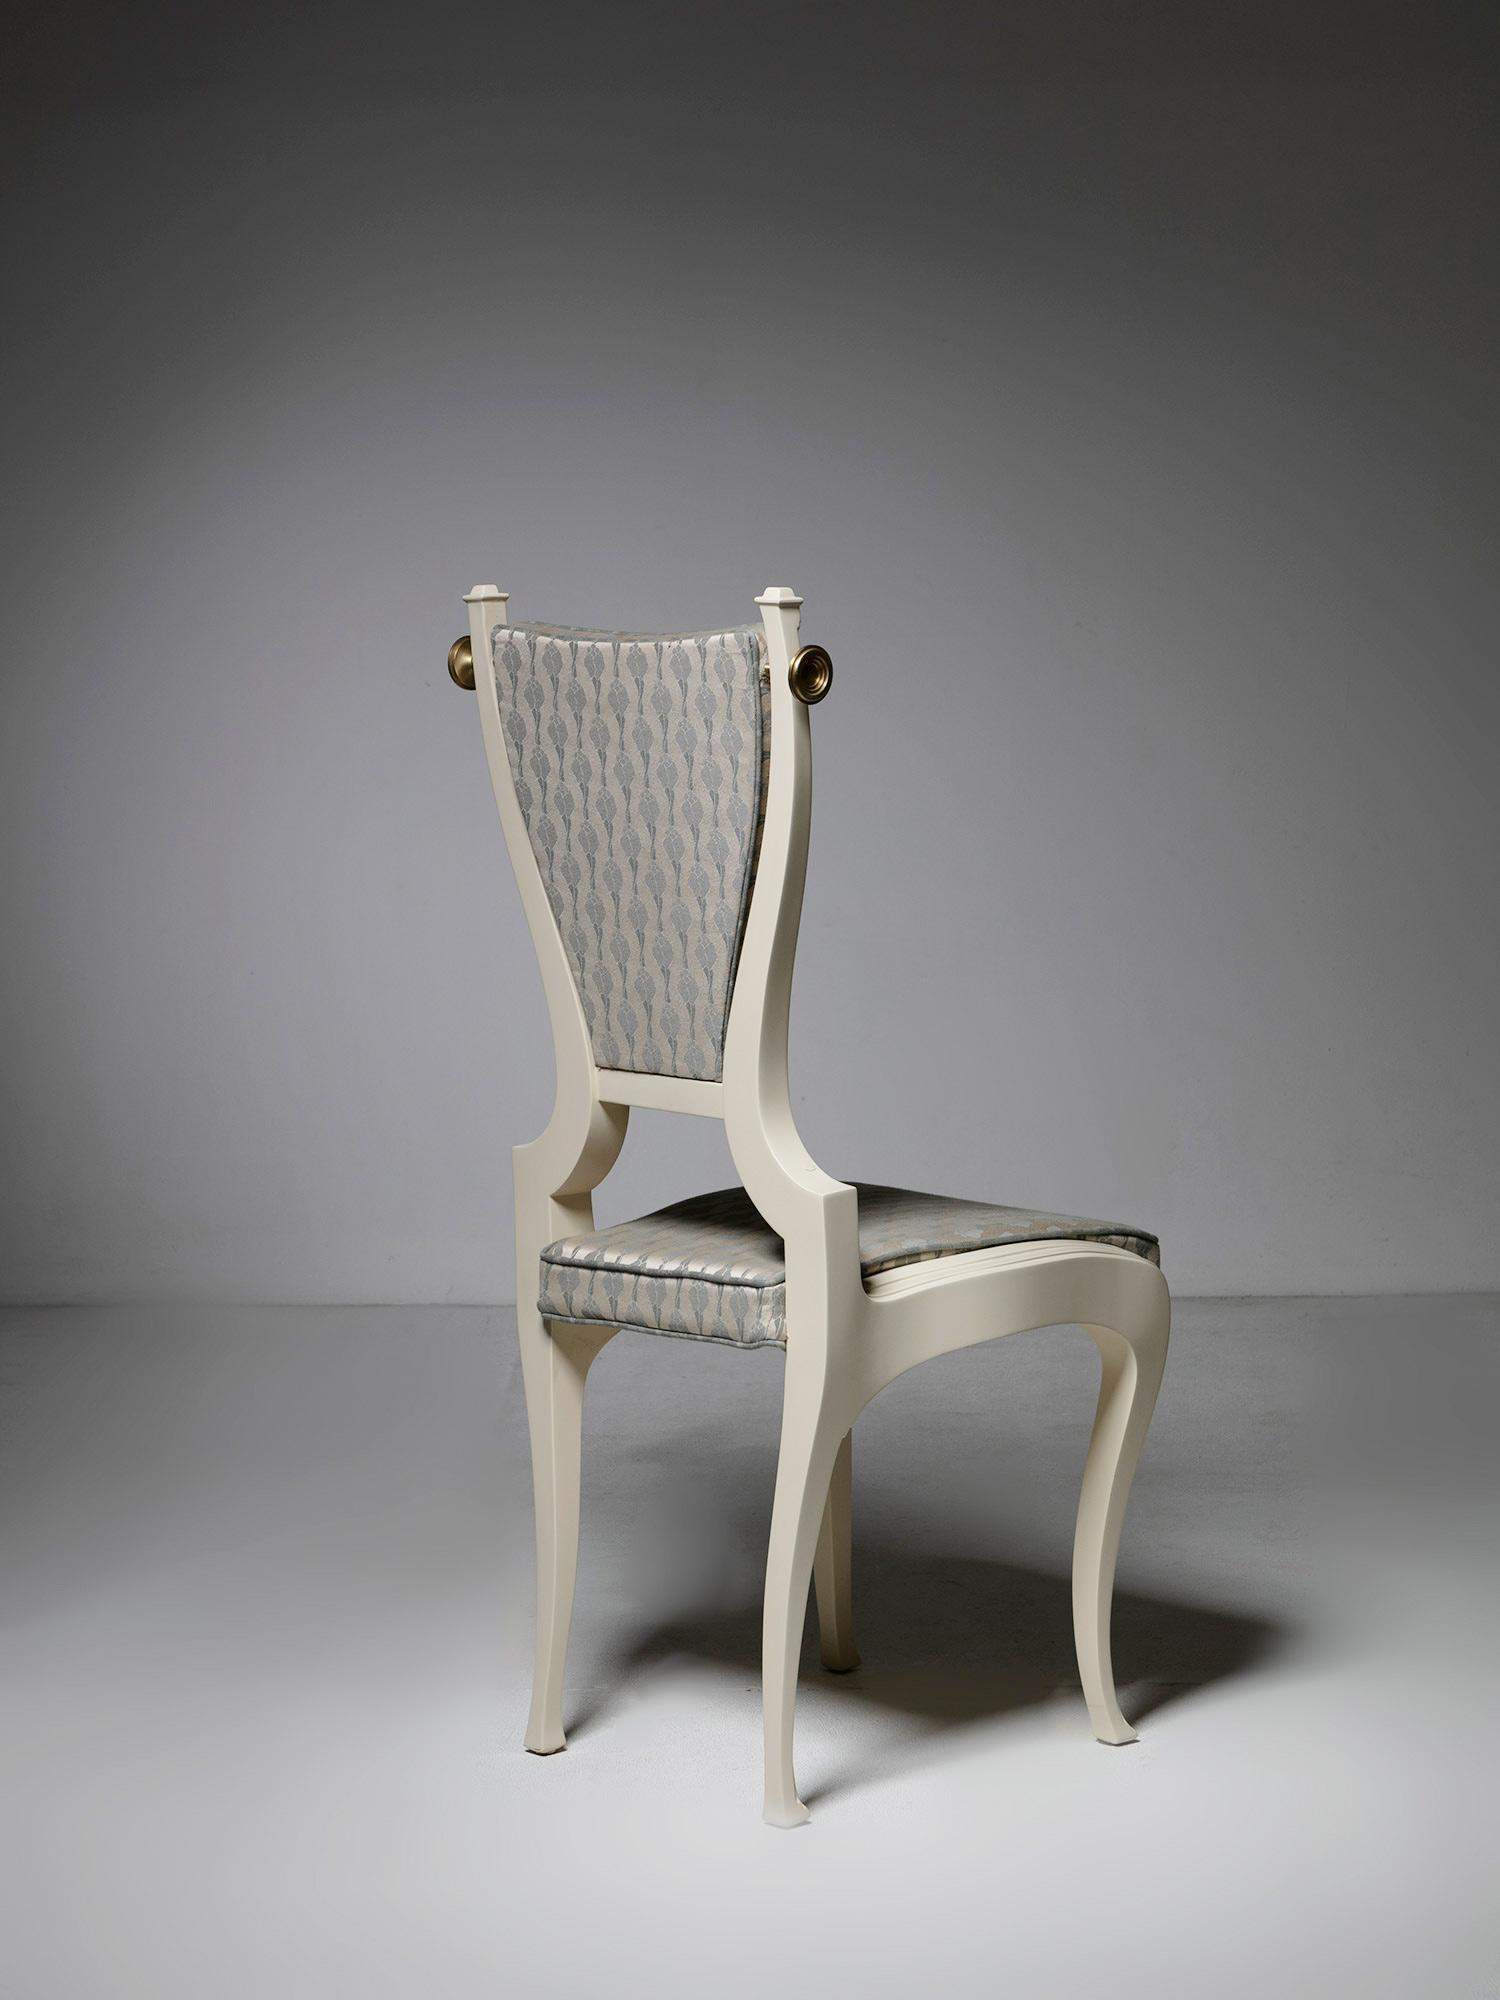 Late 20th Century Rare Sculptural Chair by Paolo Portoghesi for B&B Italia, Italy, 1990 For Sale